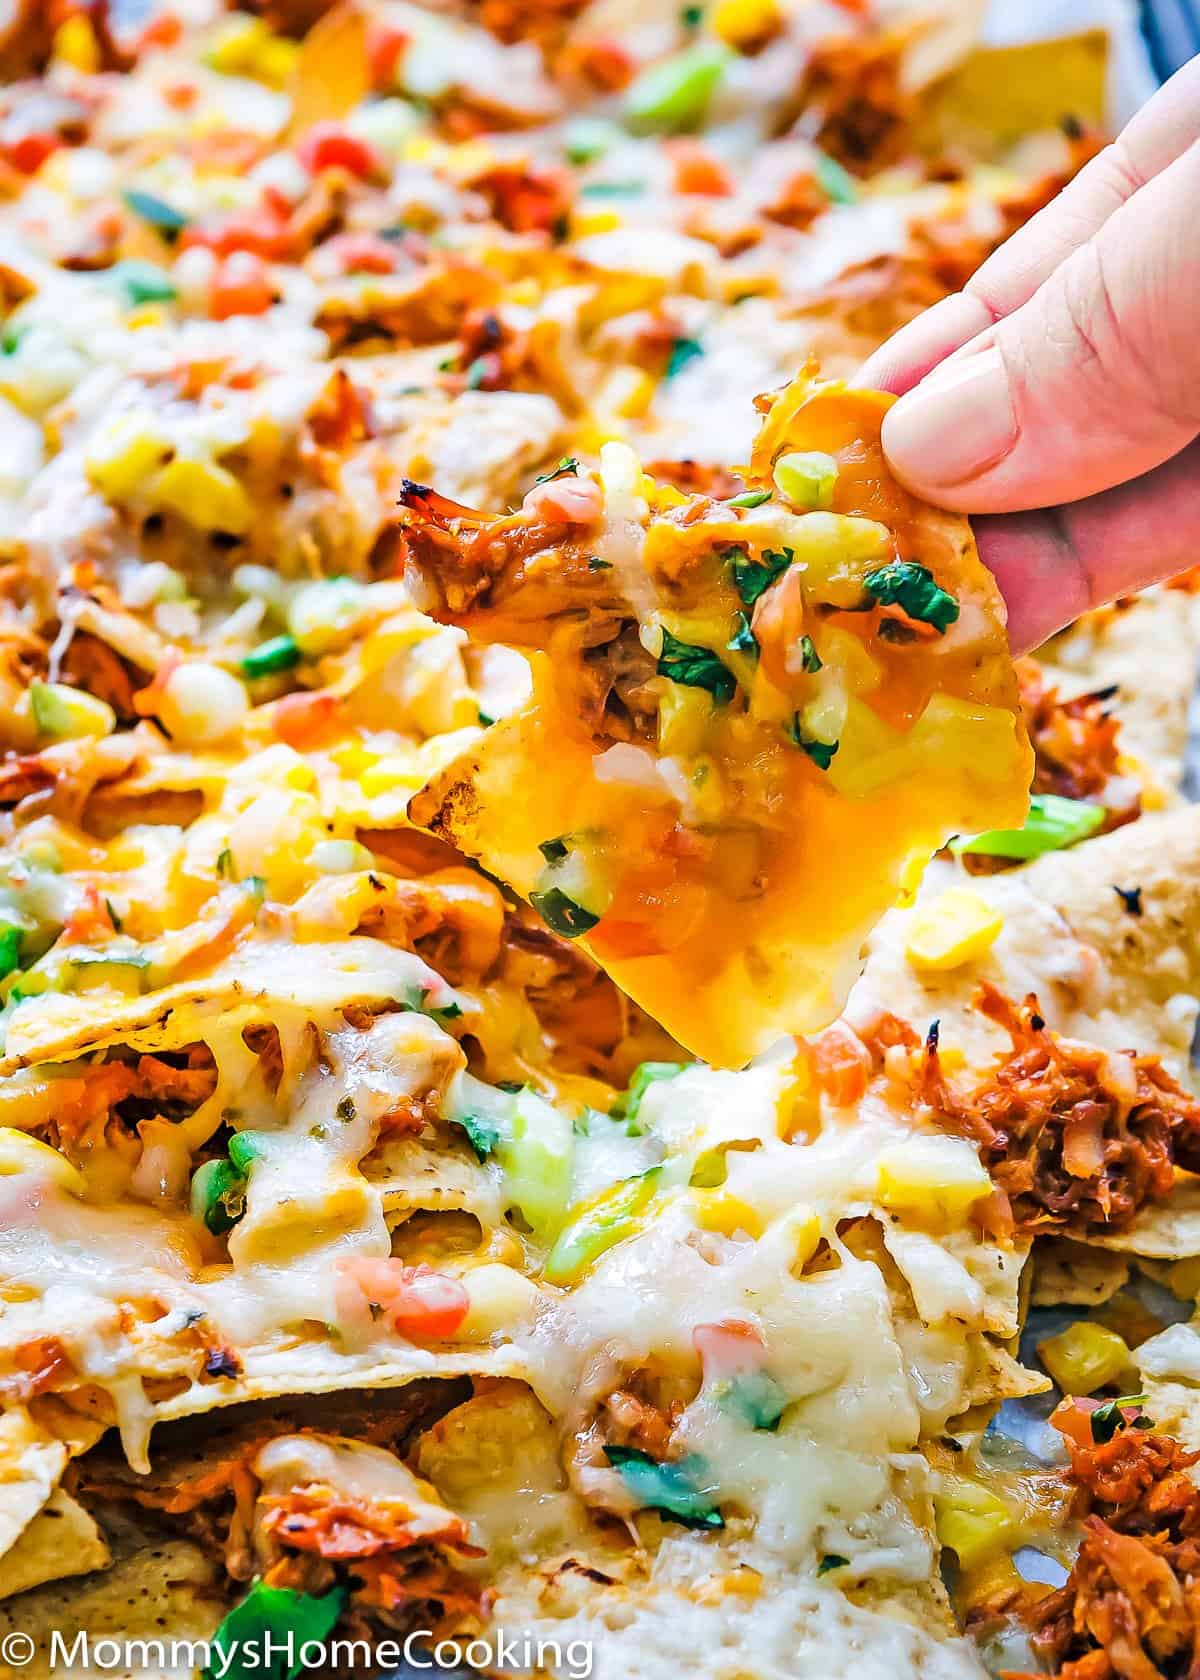 hand holding a Tequila Barbecue Chicken nacho